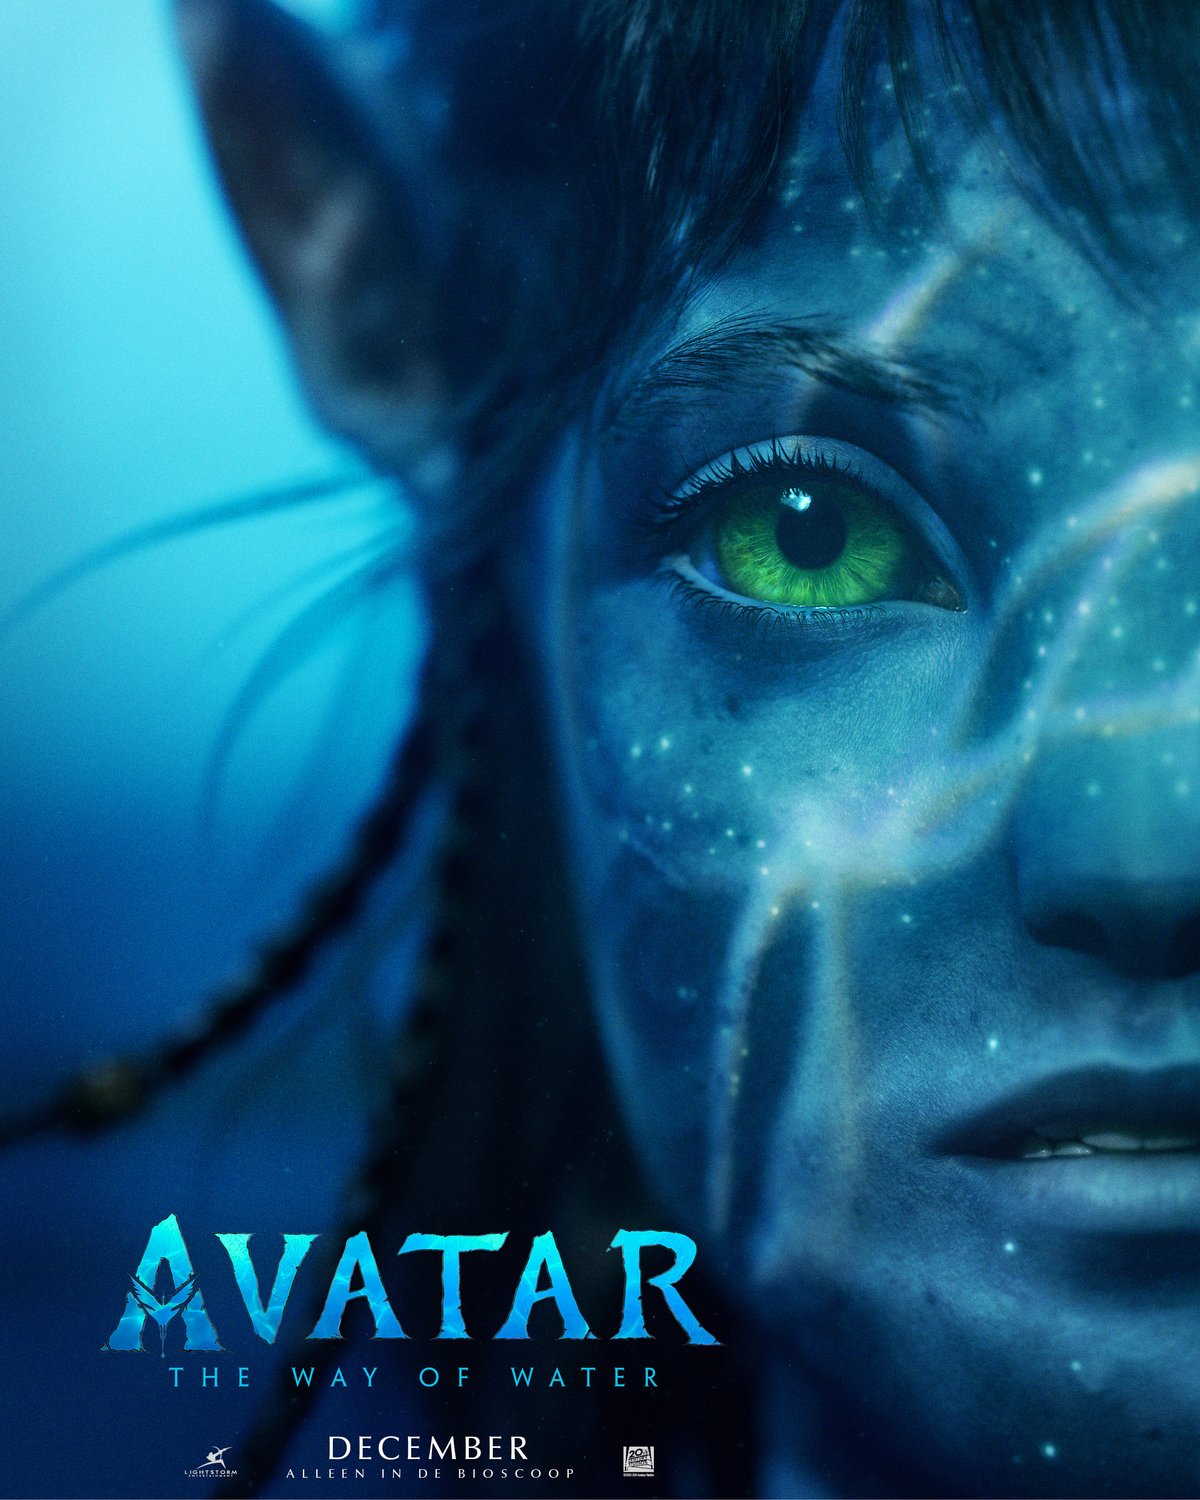 AVATAR: THE WAY OF WATER IN 3D